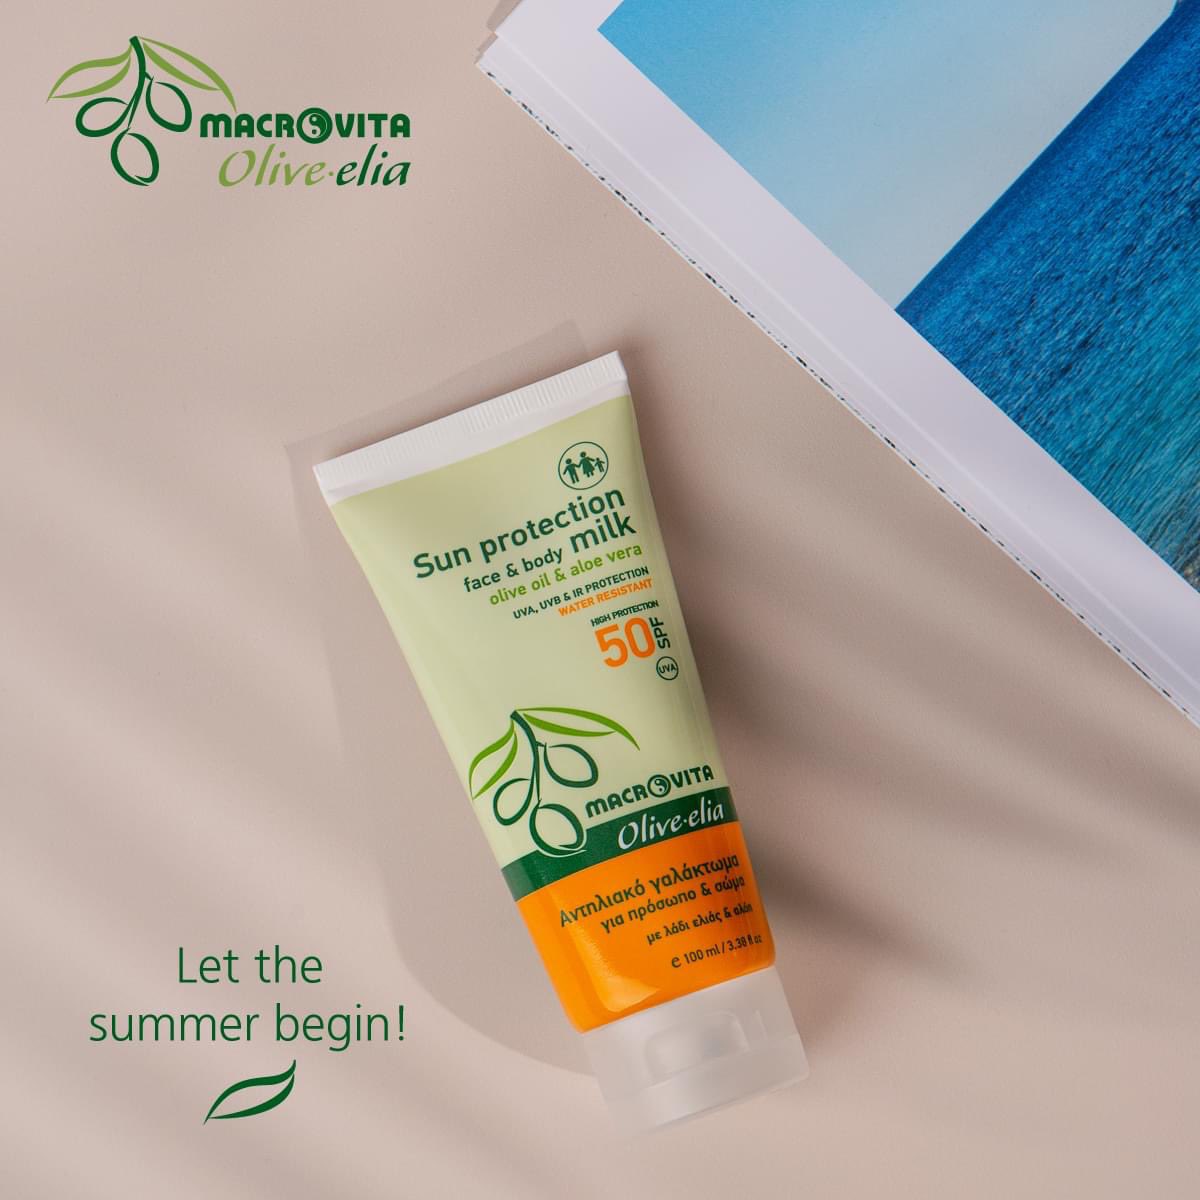 Sun Protection Face & Body Milk SPF50 with olive oil & aloe vera is your ideal summer partner!
#MacrovitaCanada #SunProtection #Face #Body #OliveOil #AloeVera #SPF50